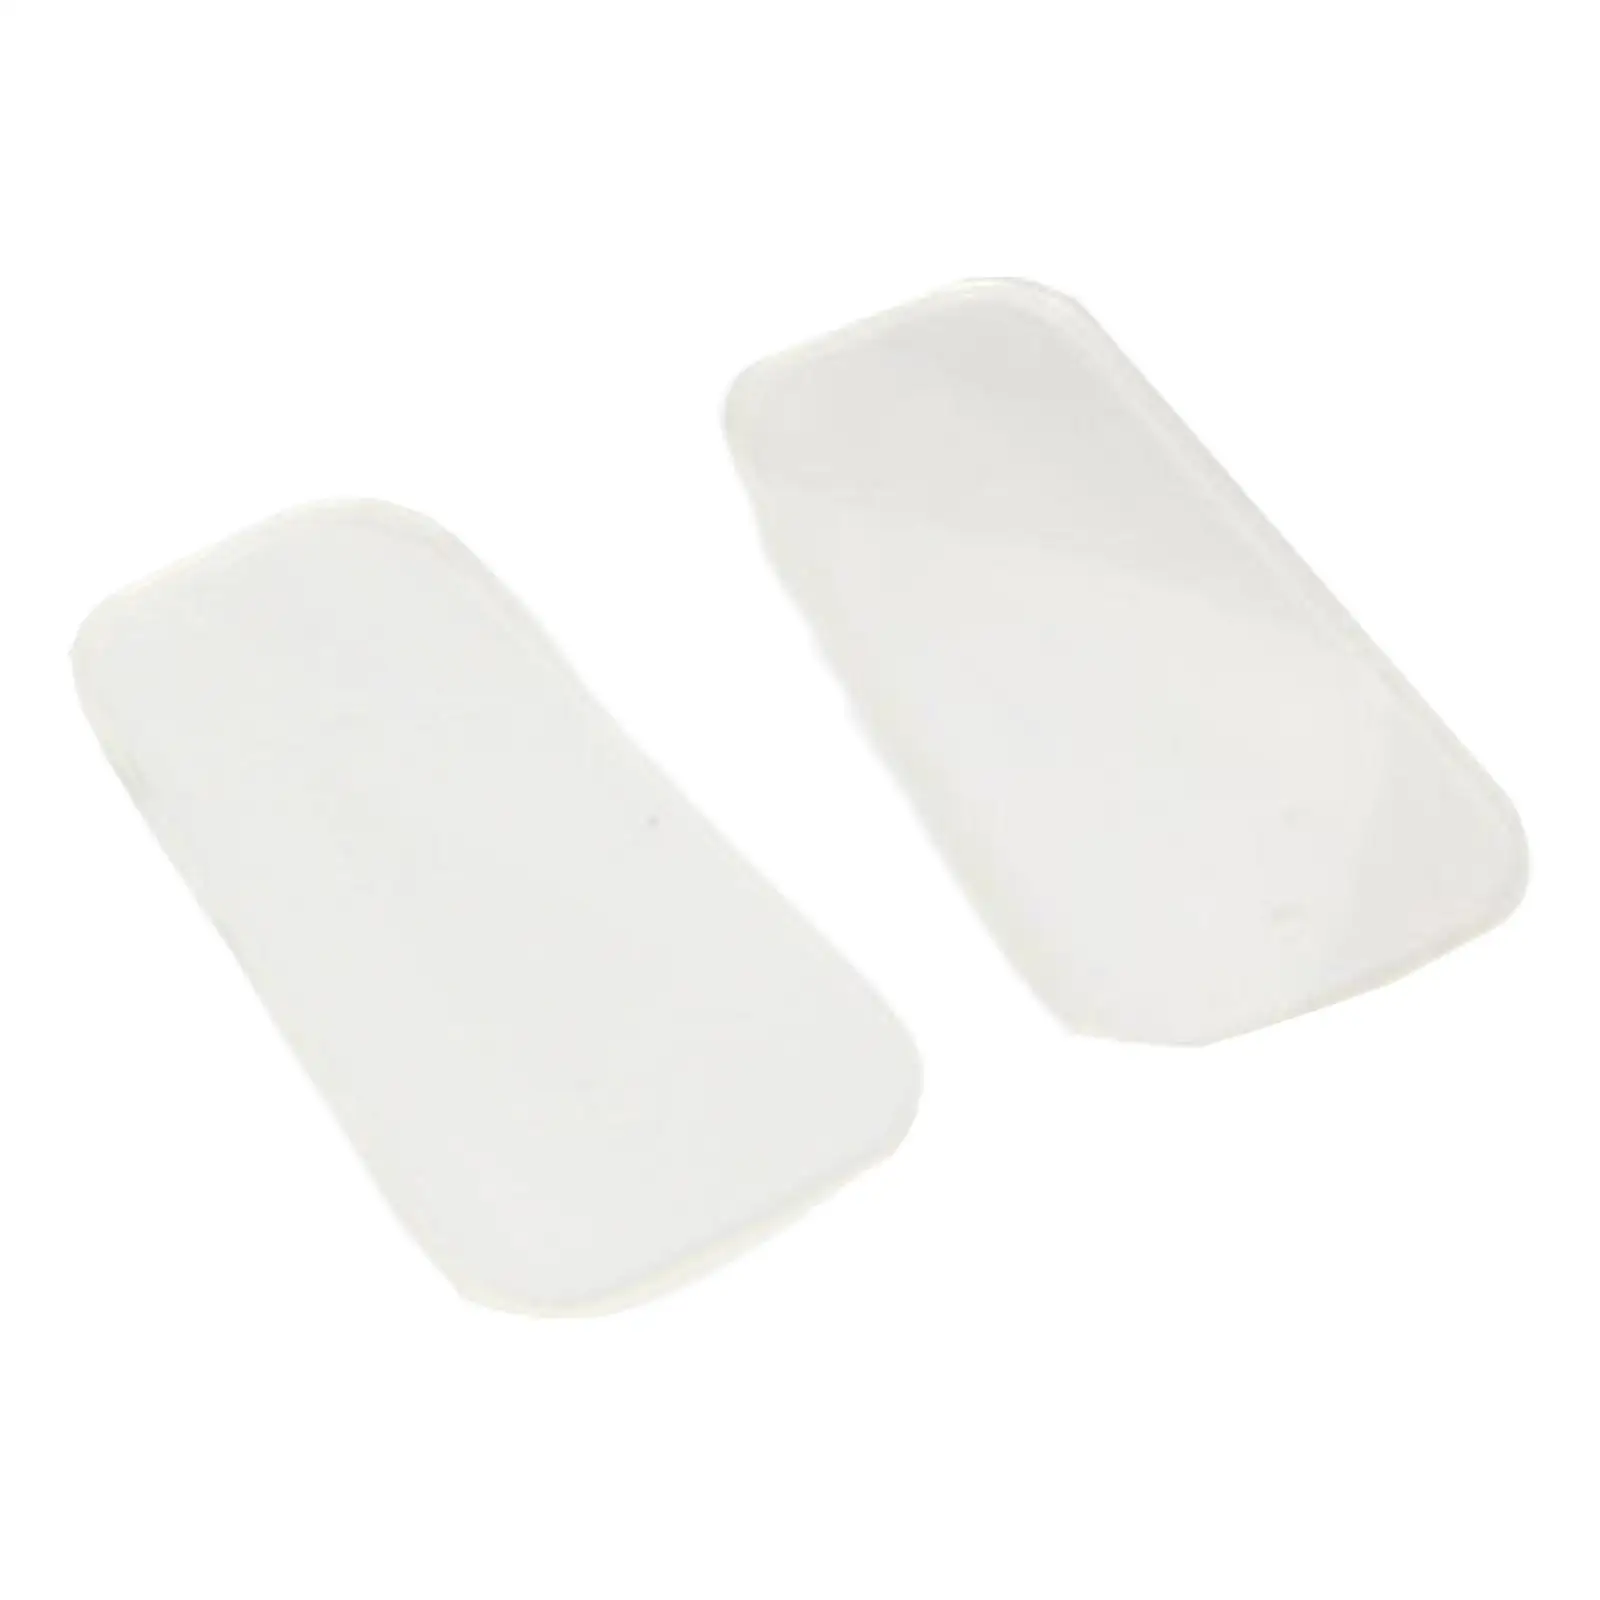 2Pcs Gel Sheet Replacement Reusable for Abdominal Trainer Workout Toning Belt Stimulator Training Accessory